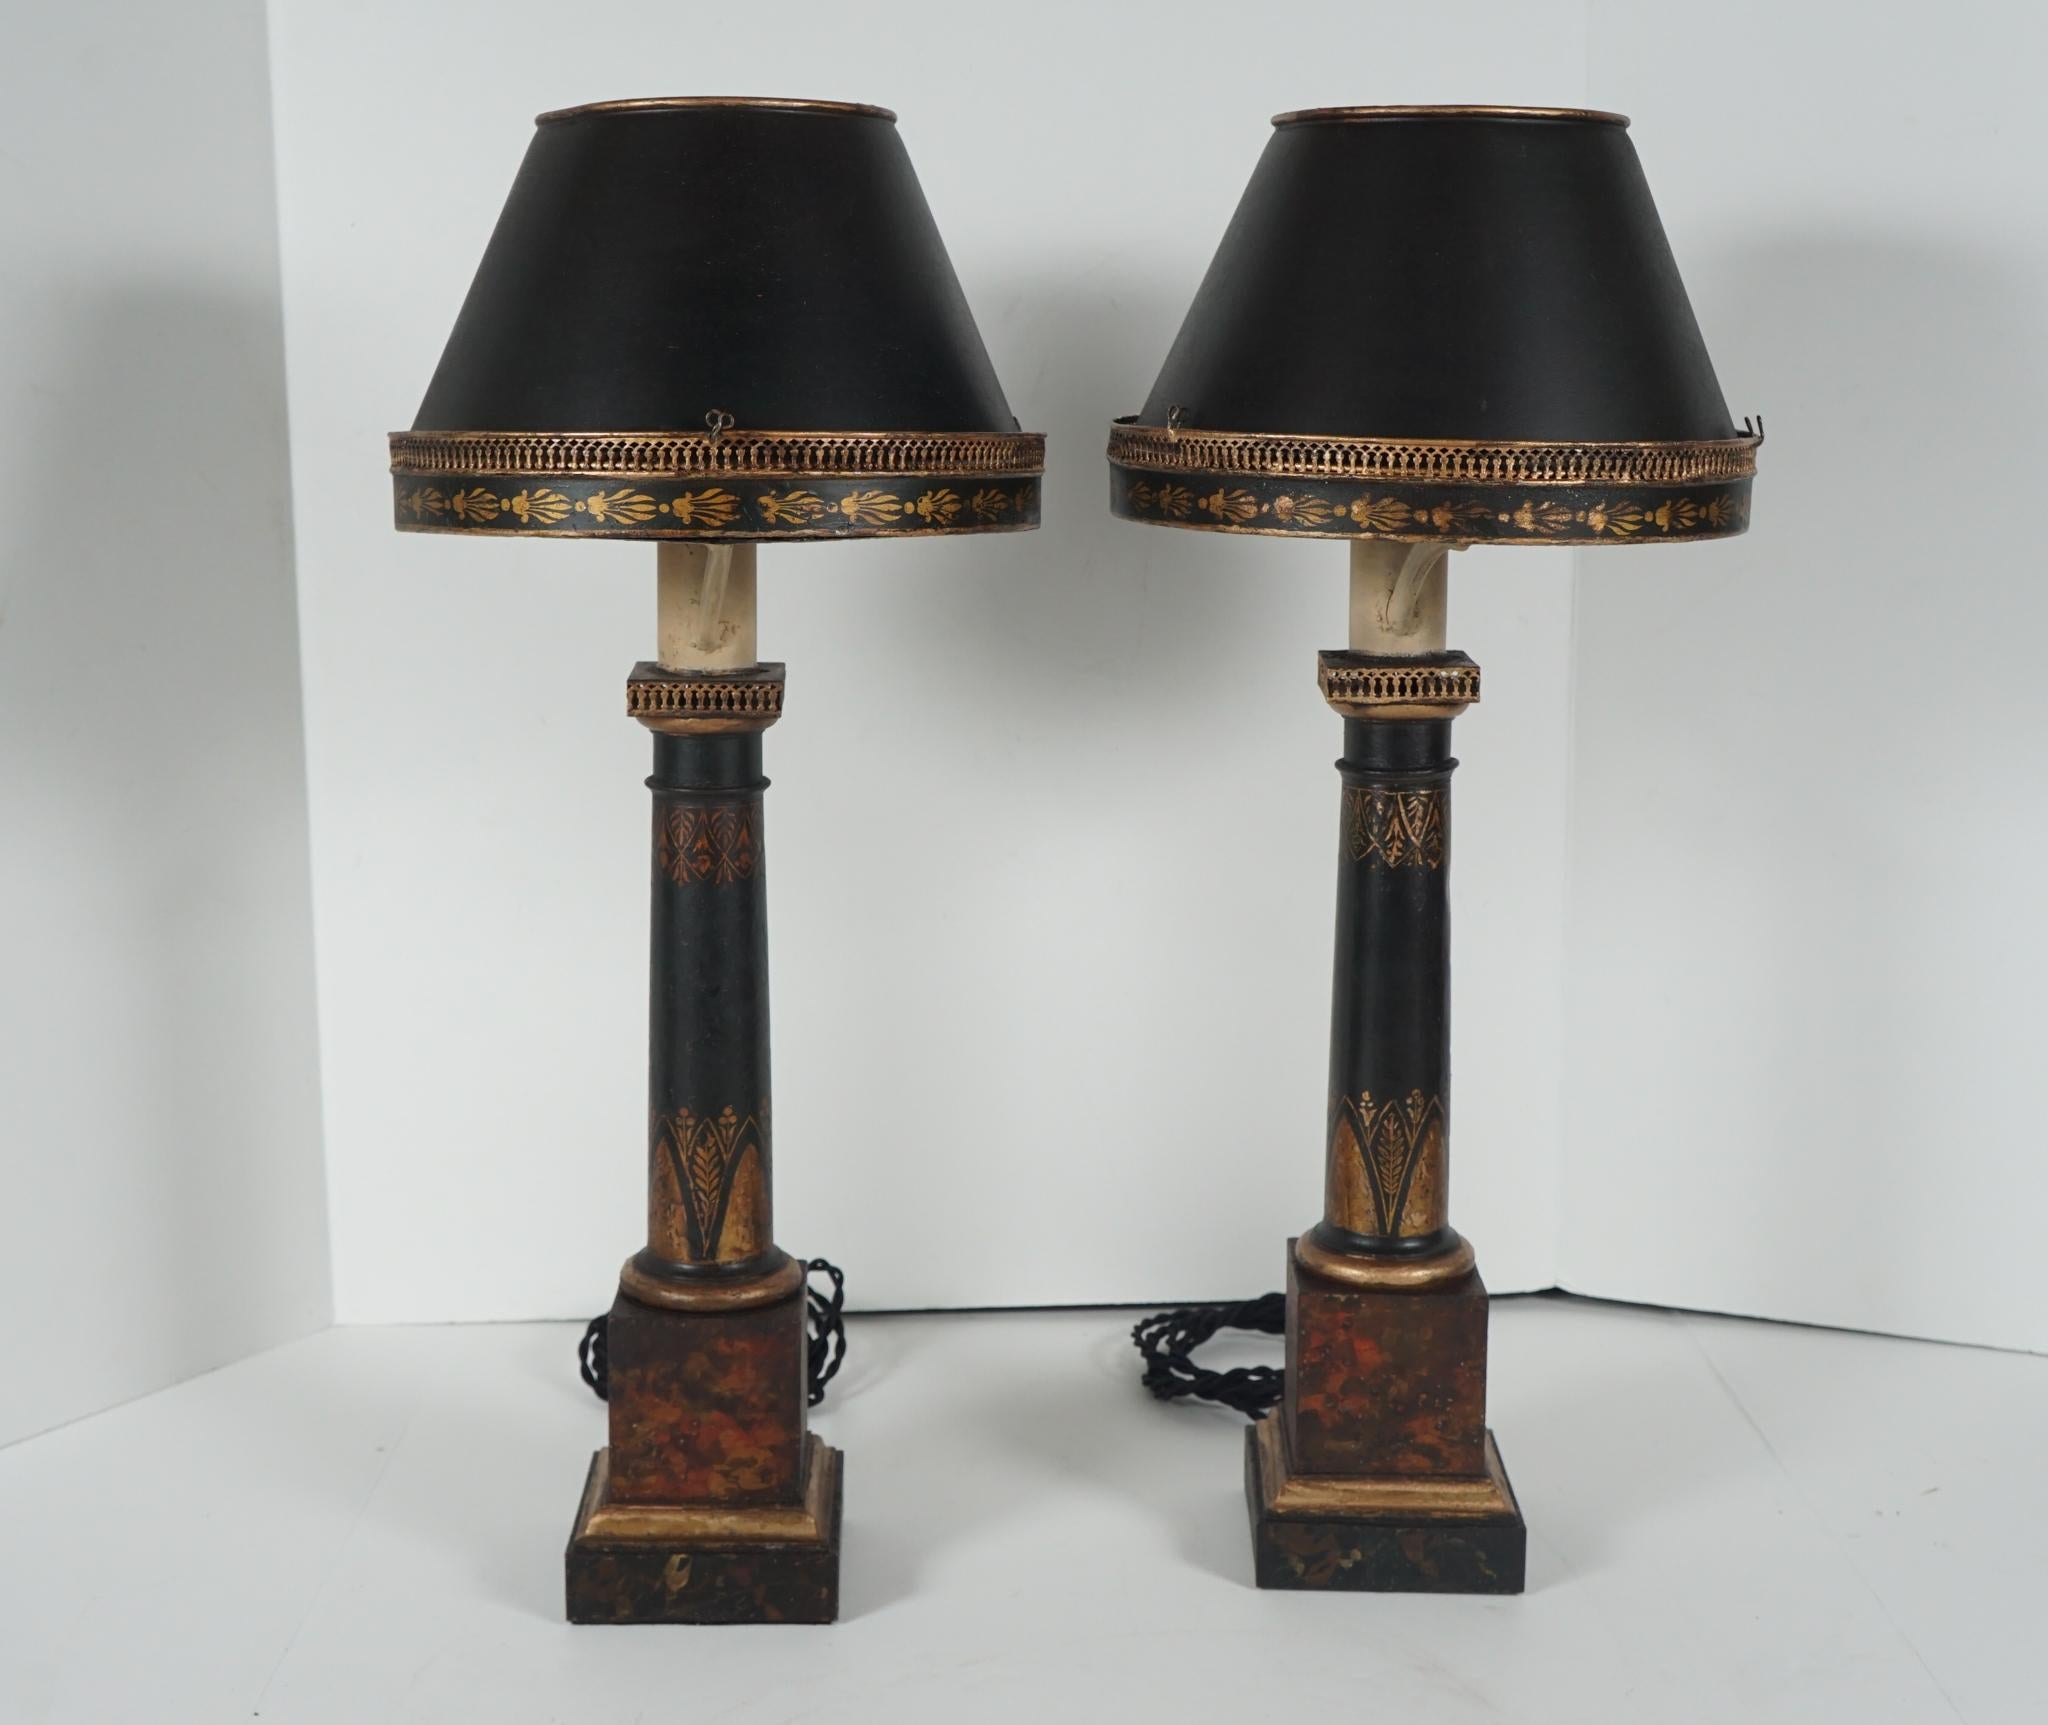 This very good pair of oil, lamps now wired for electricity, were made in France circa 1815. Originally having glass shade they currently have tole shade that appears to have been fitted to them in the first quarter of the 20th century. The lamps